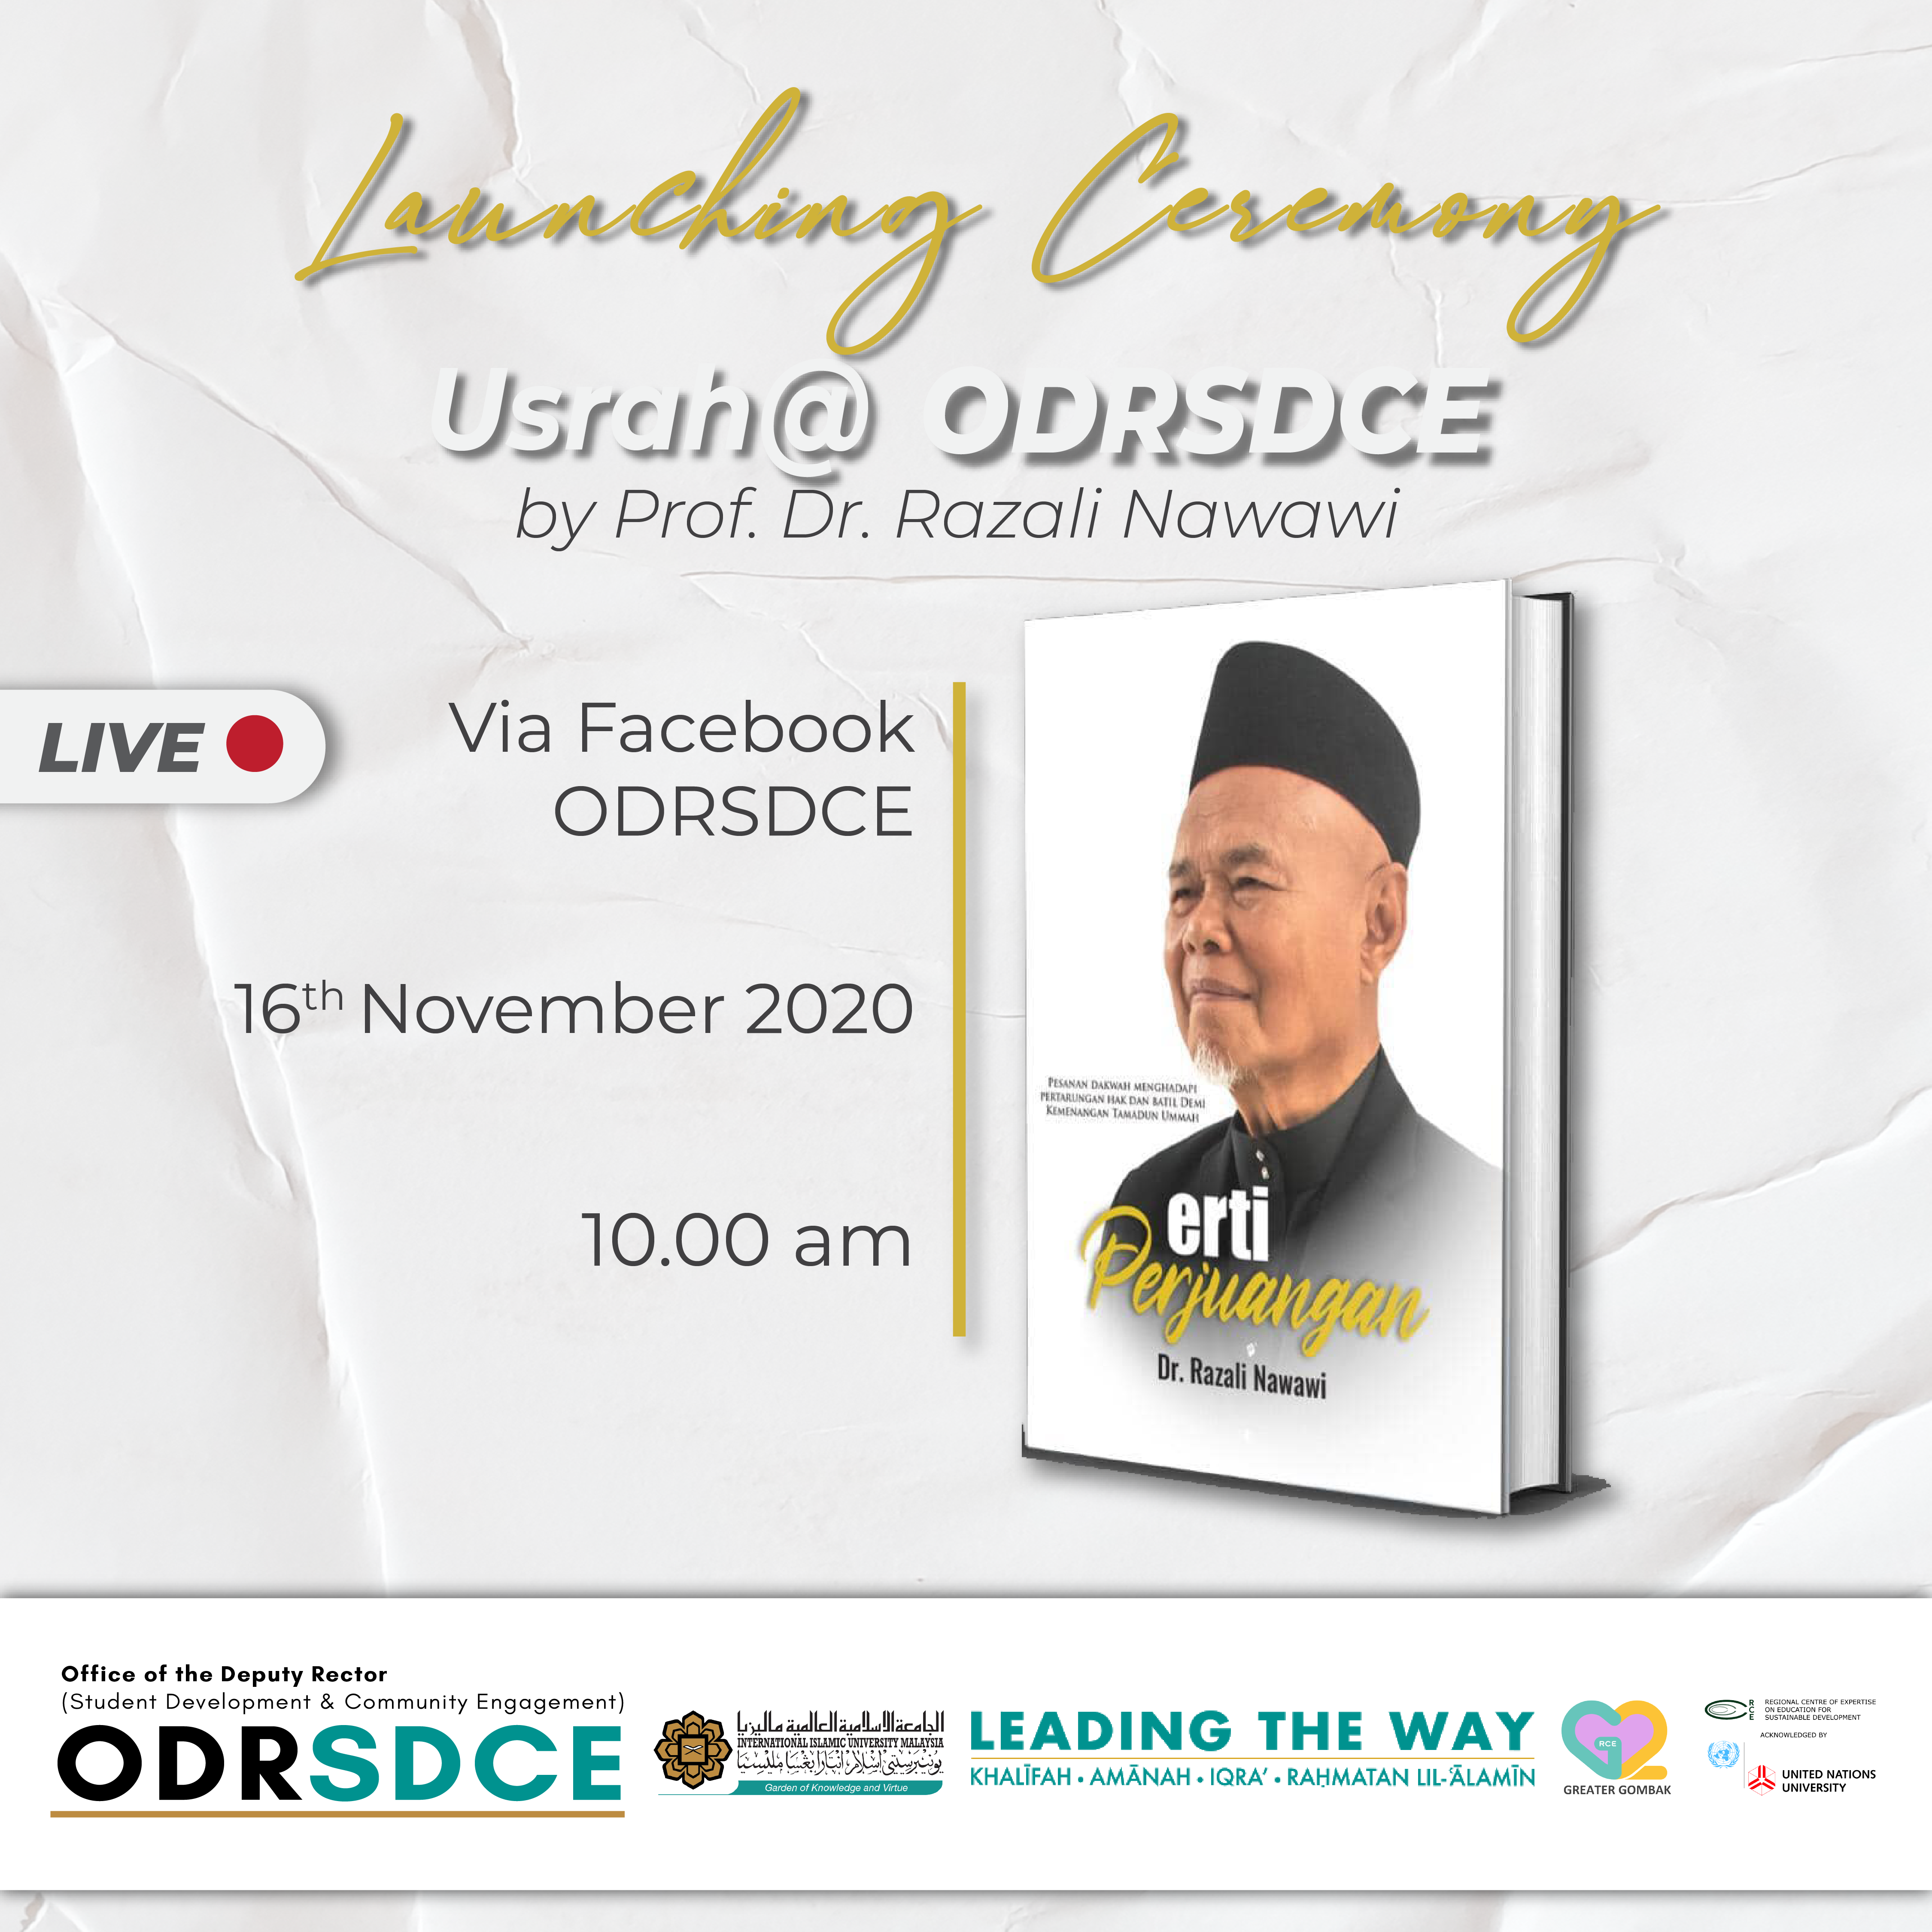 INVITATION TO PARTICIPATE LAUNCHING CEREMONY OF USRAH @ ODRSDCE